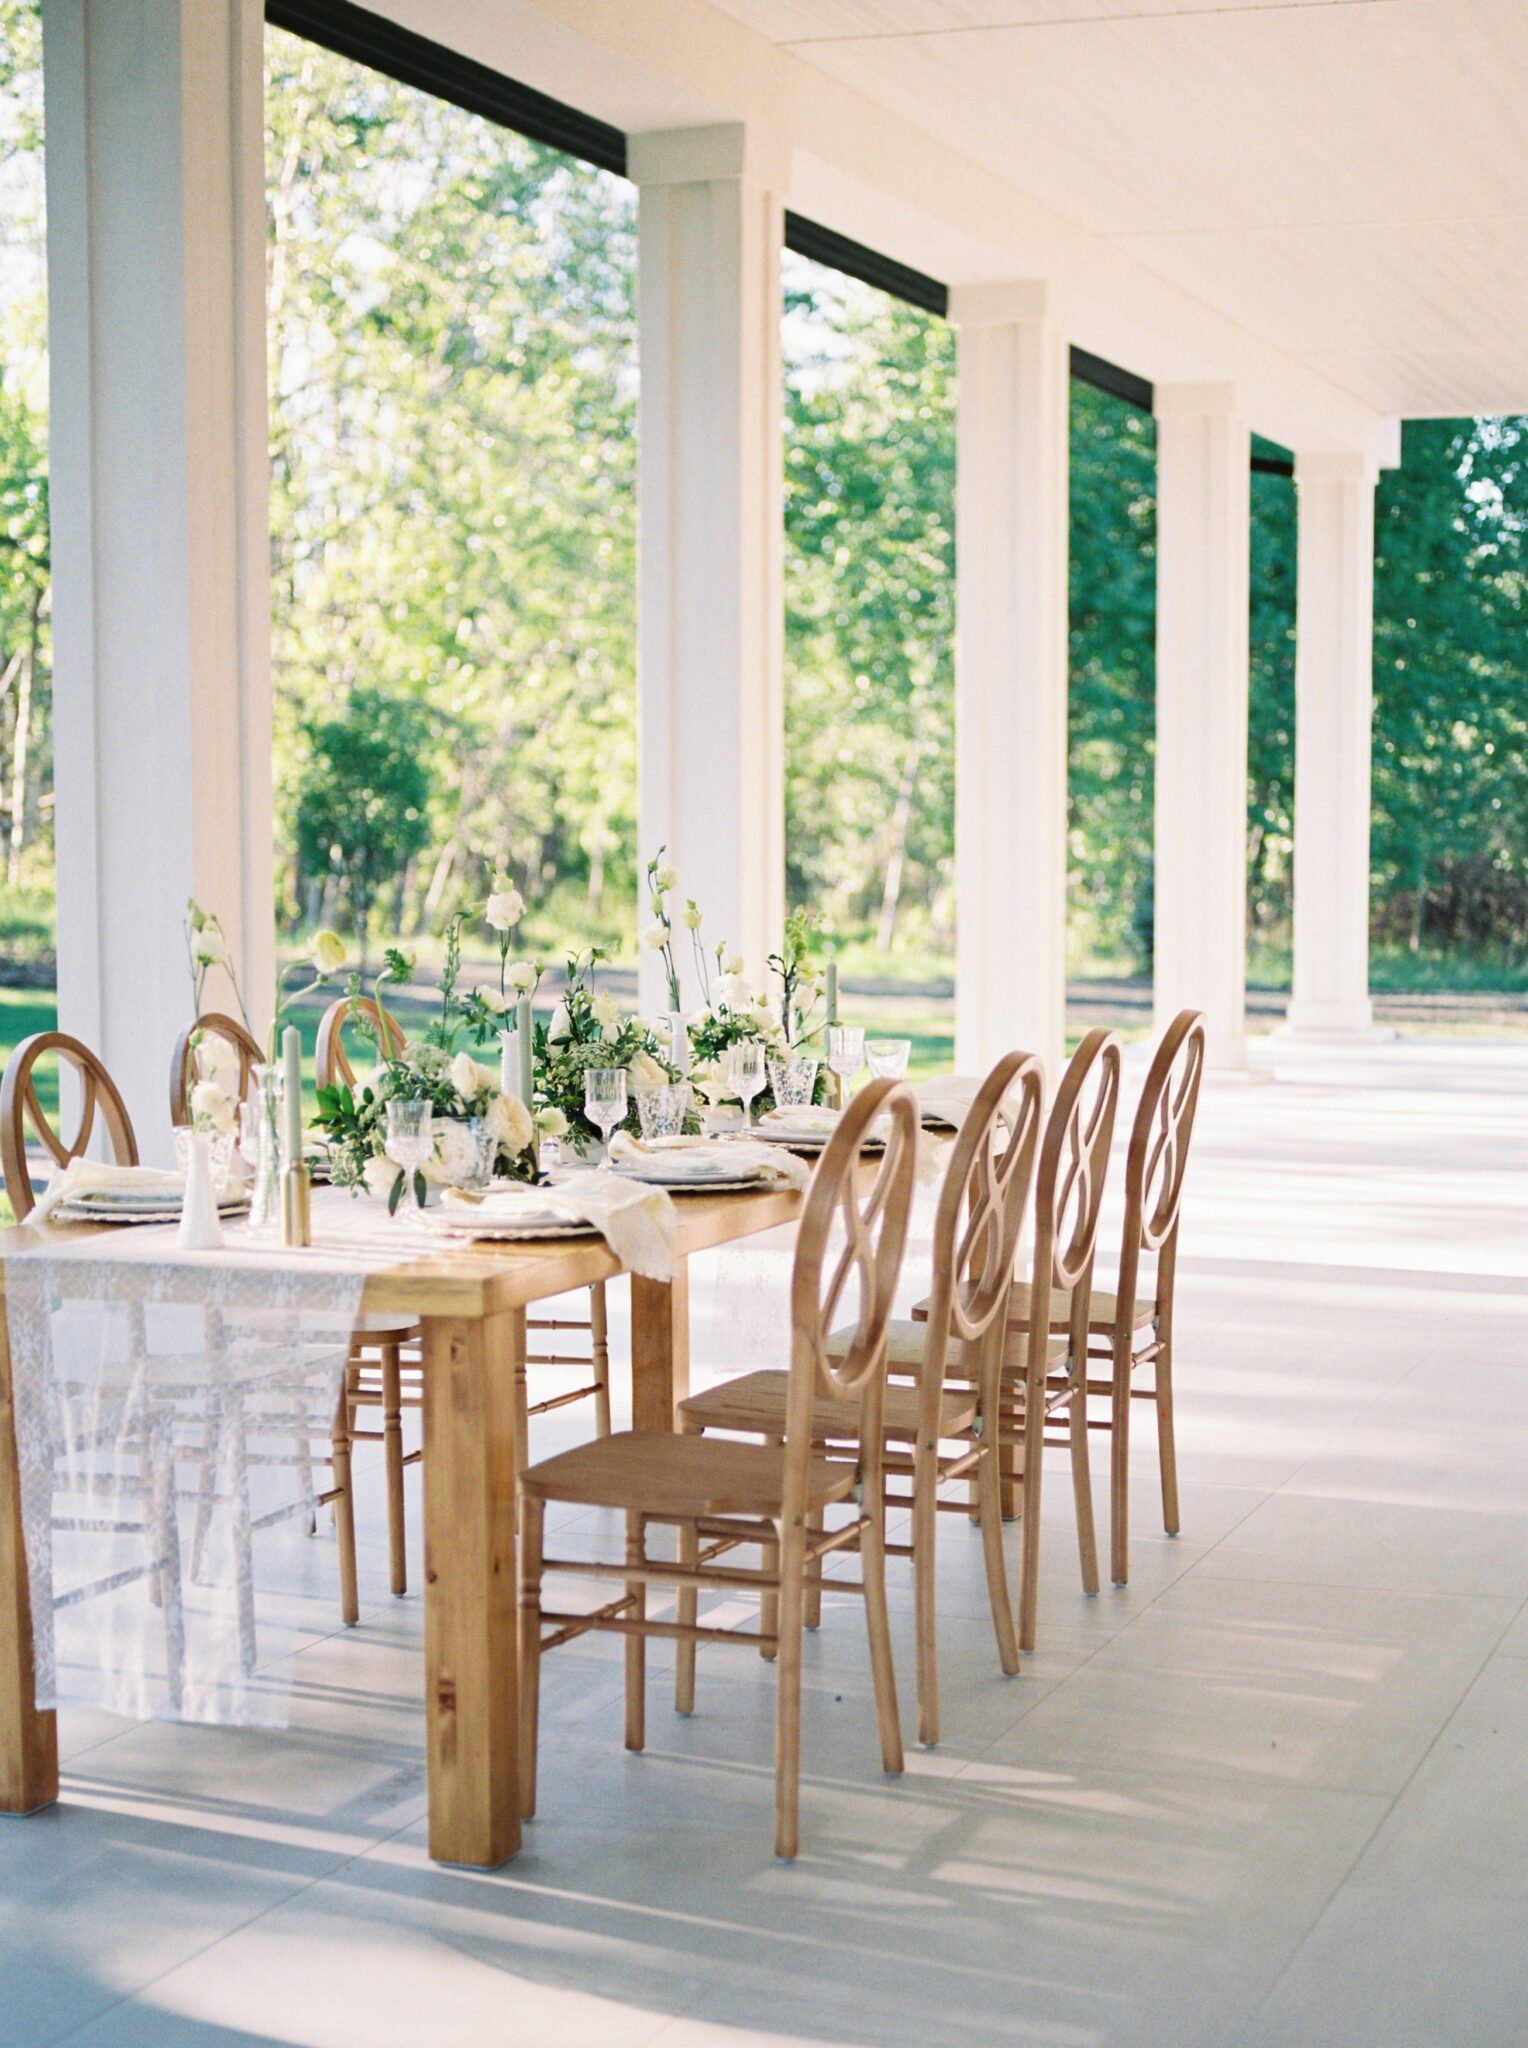 Cottage core inspired wedding reception at Sparrow Lane Weddings and Events venue near Edmonton, Alberta. Fine art summer wedding. Wooden infinity chairs, outdoor summer wedding tablescape with lush florals in pale yellow, ivory and white with greenery. 